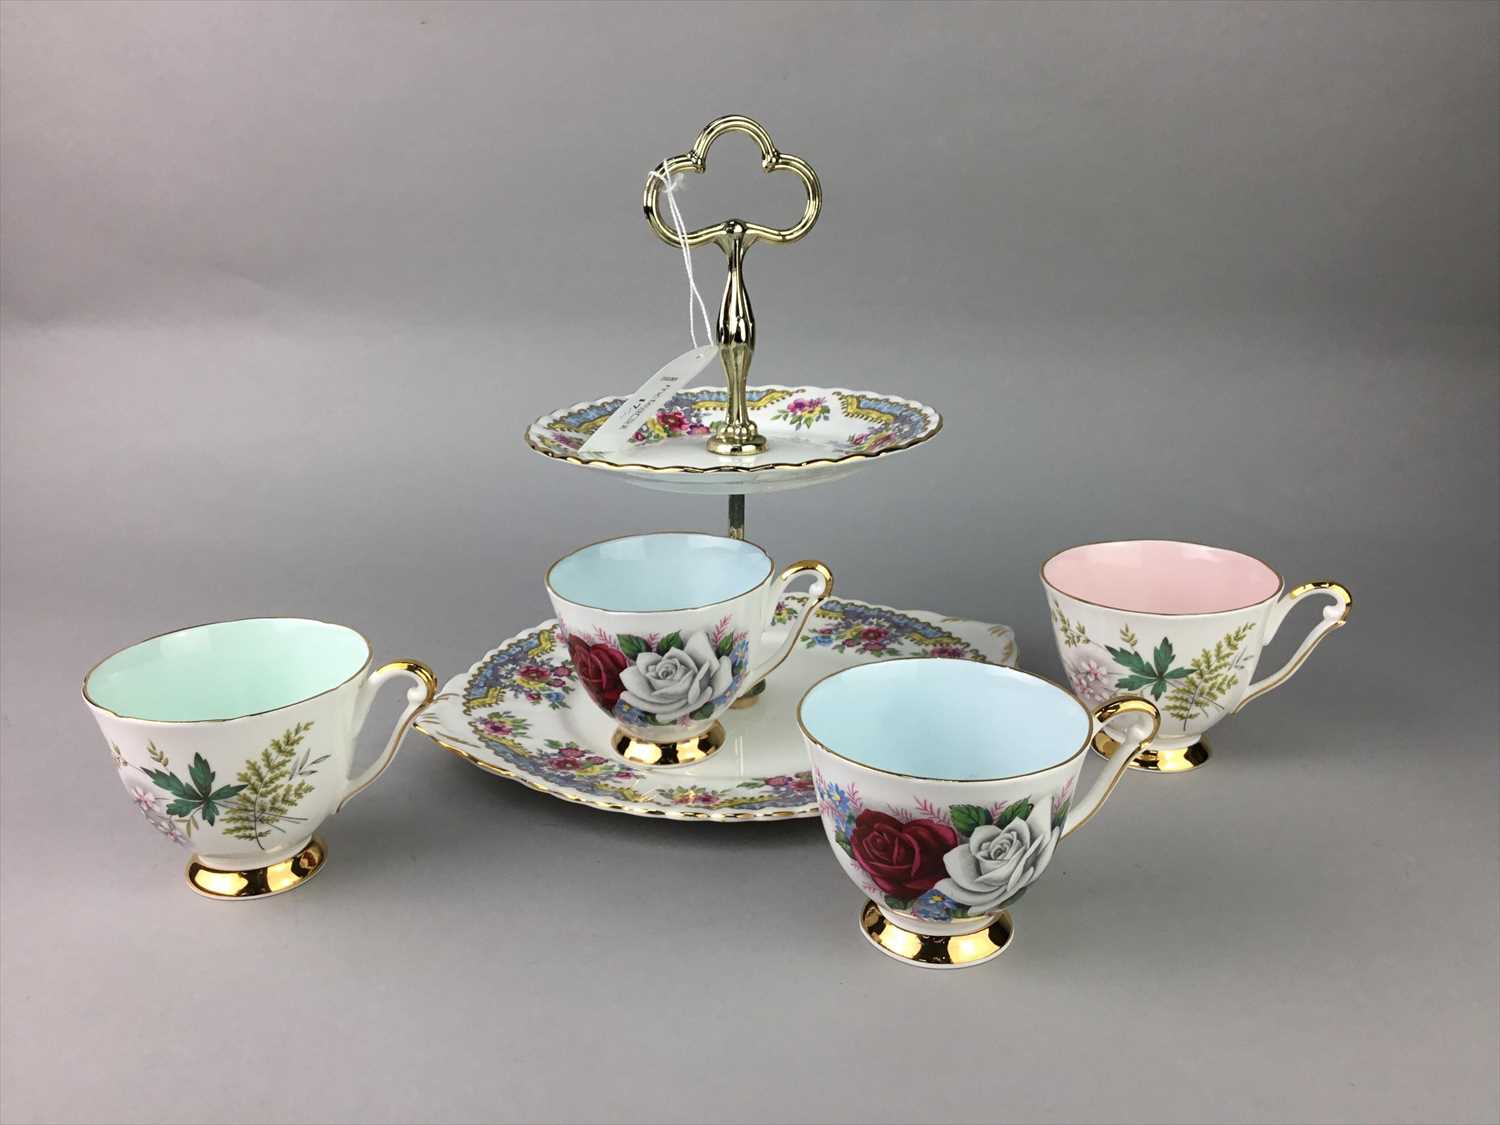 Lot 17 - A THREE TIER CAKE STAND ALONG WITH OTHER CERAMICS